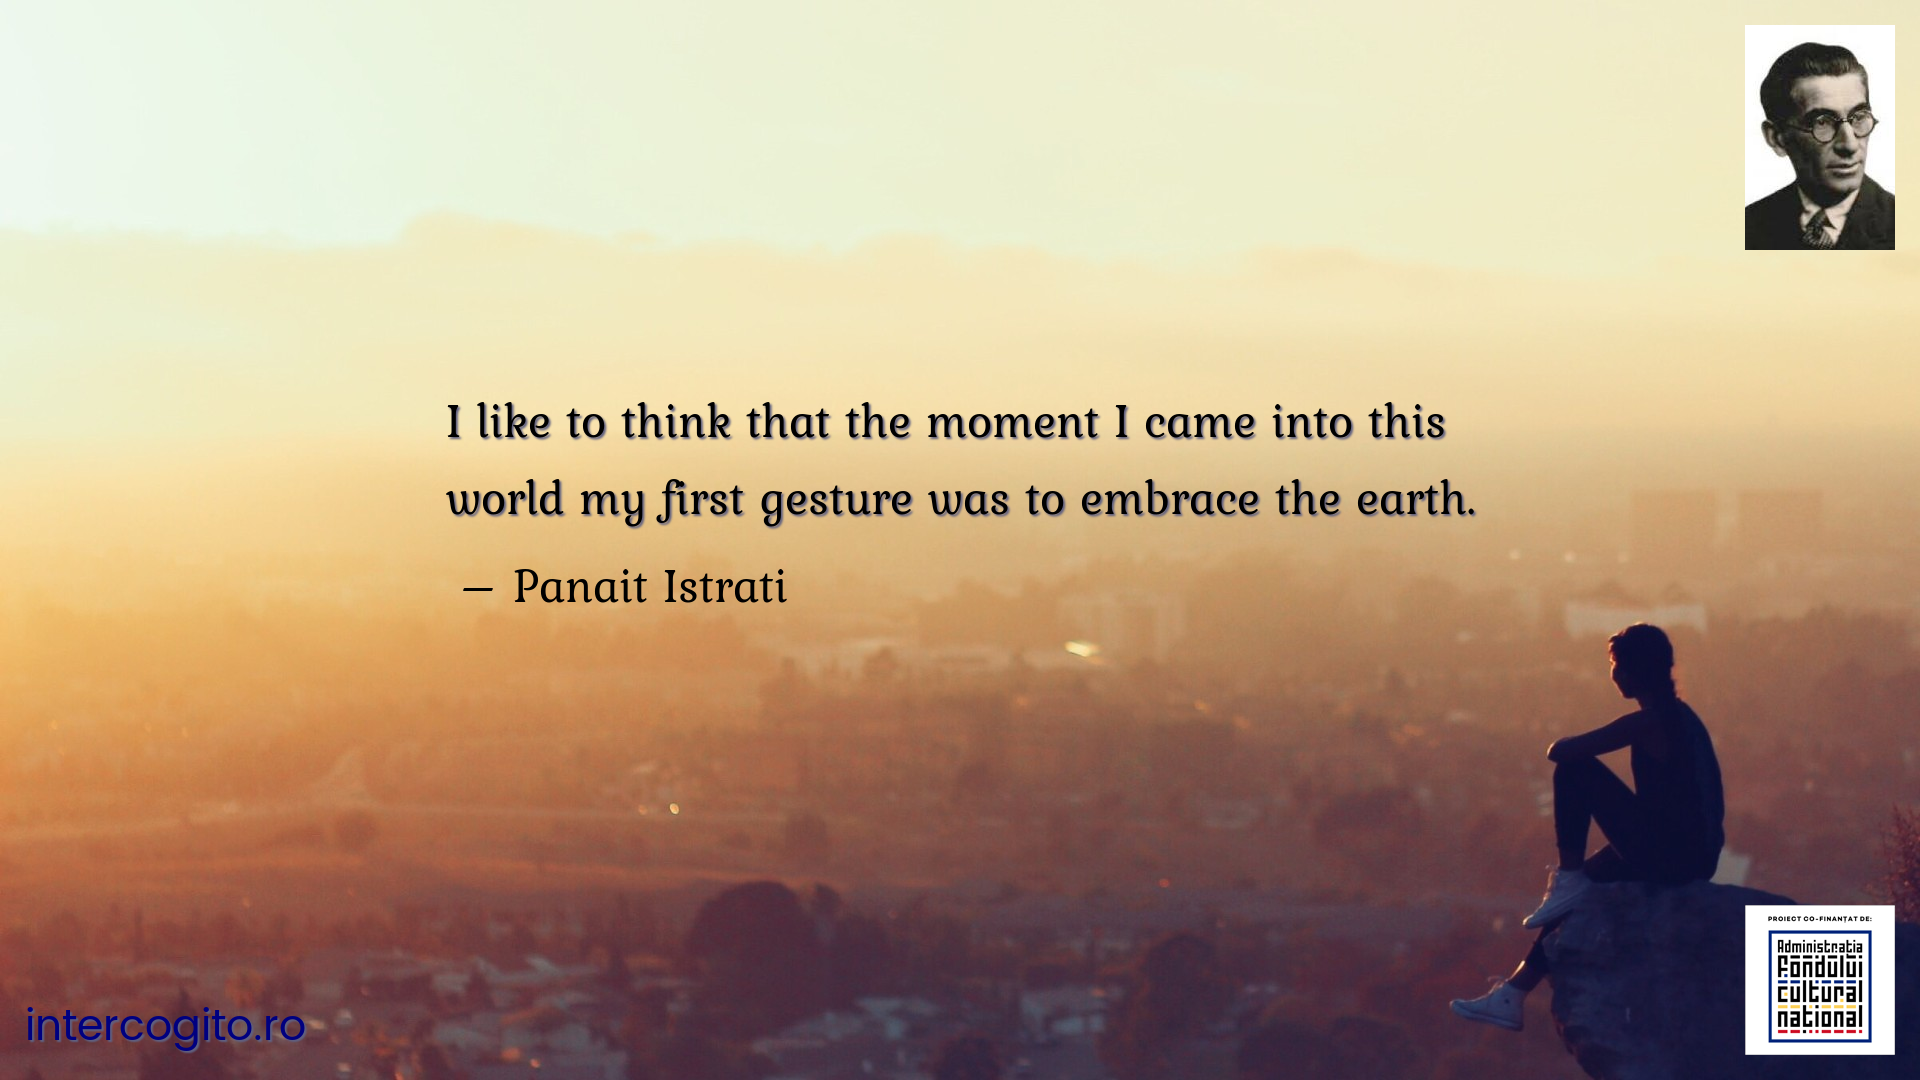 I like to think that the moment I came into this world my first gesture was to embrace the earth.